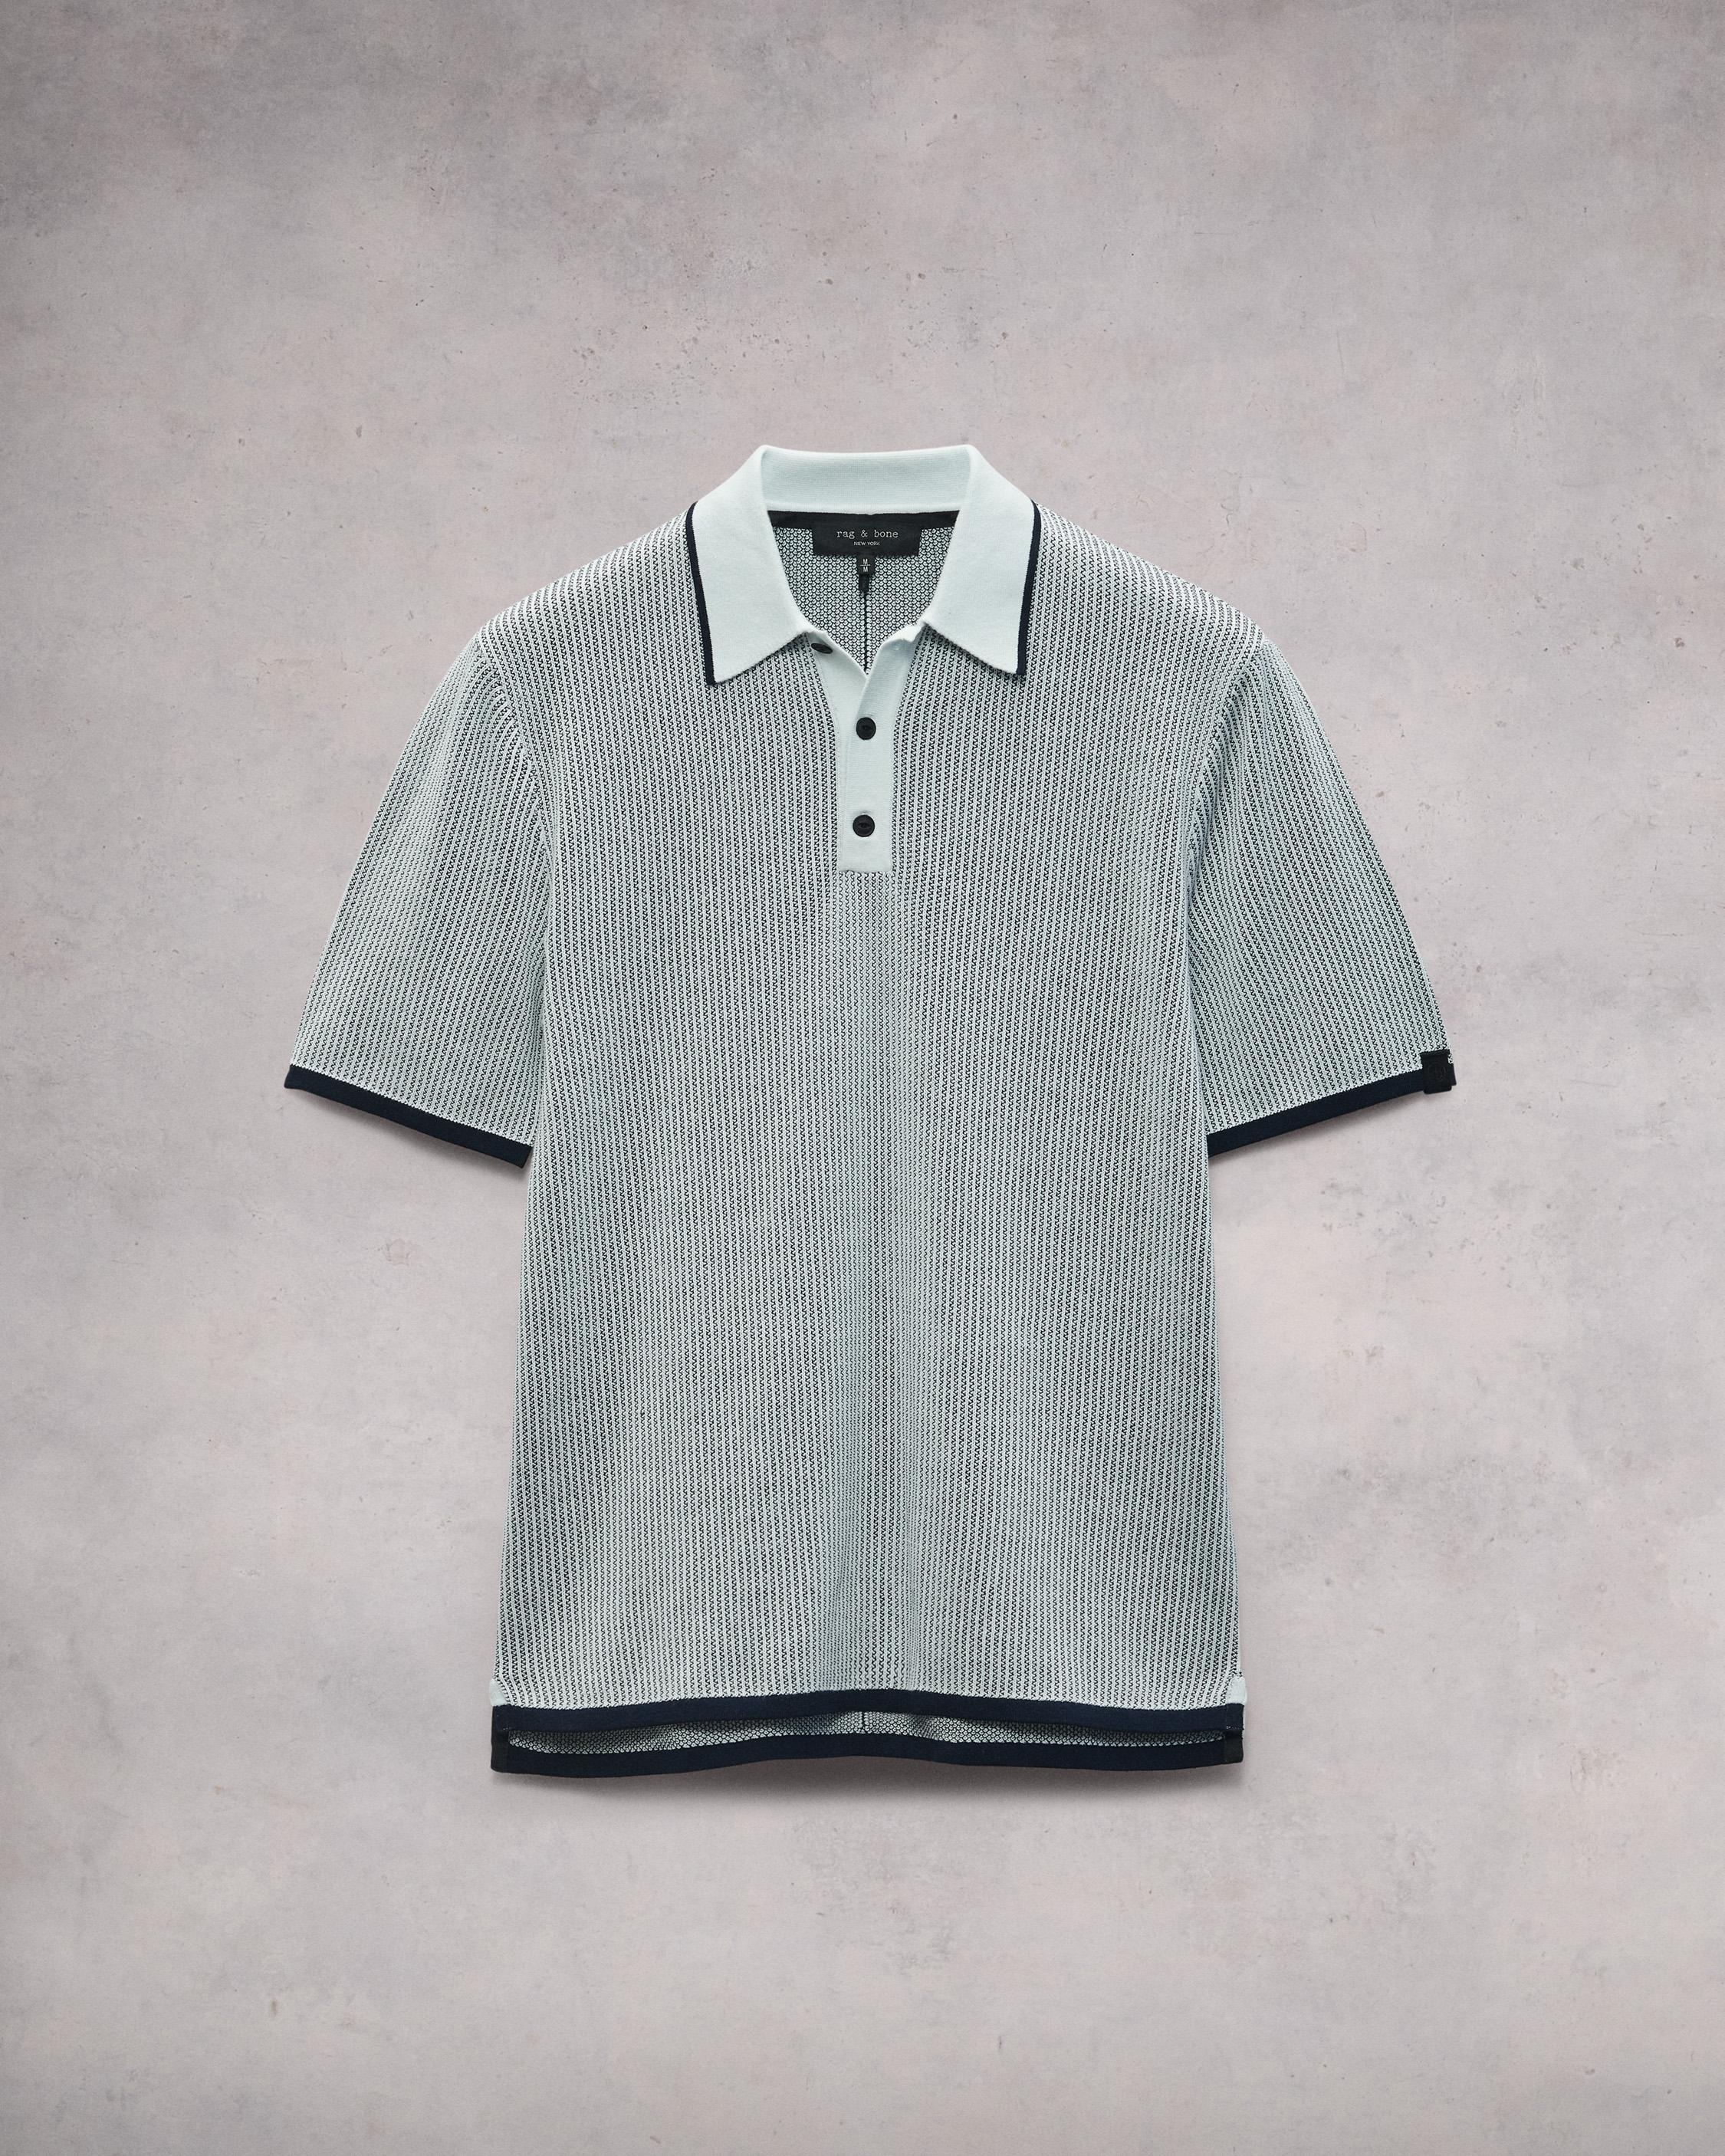 Harvey Polo
Classic Fit - 1